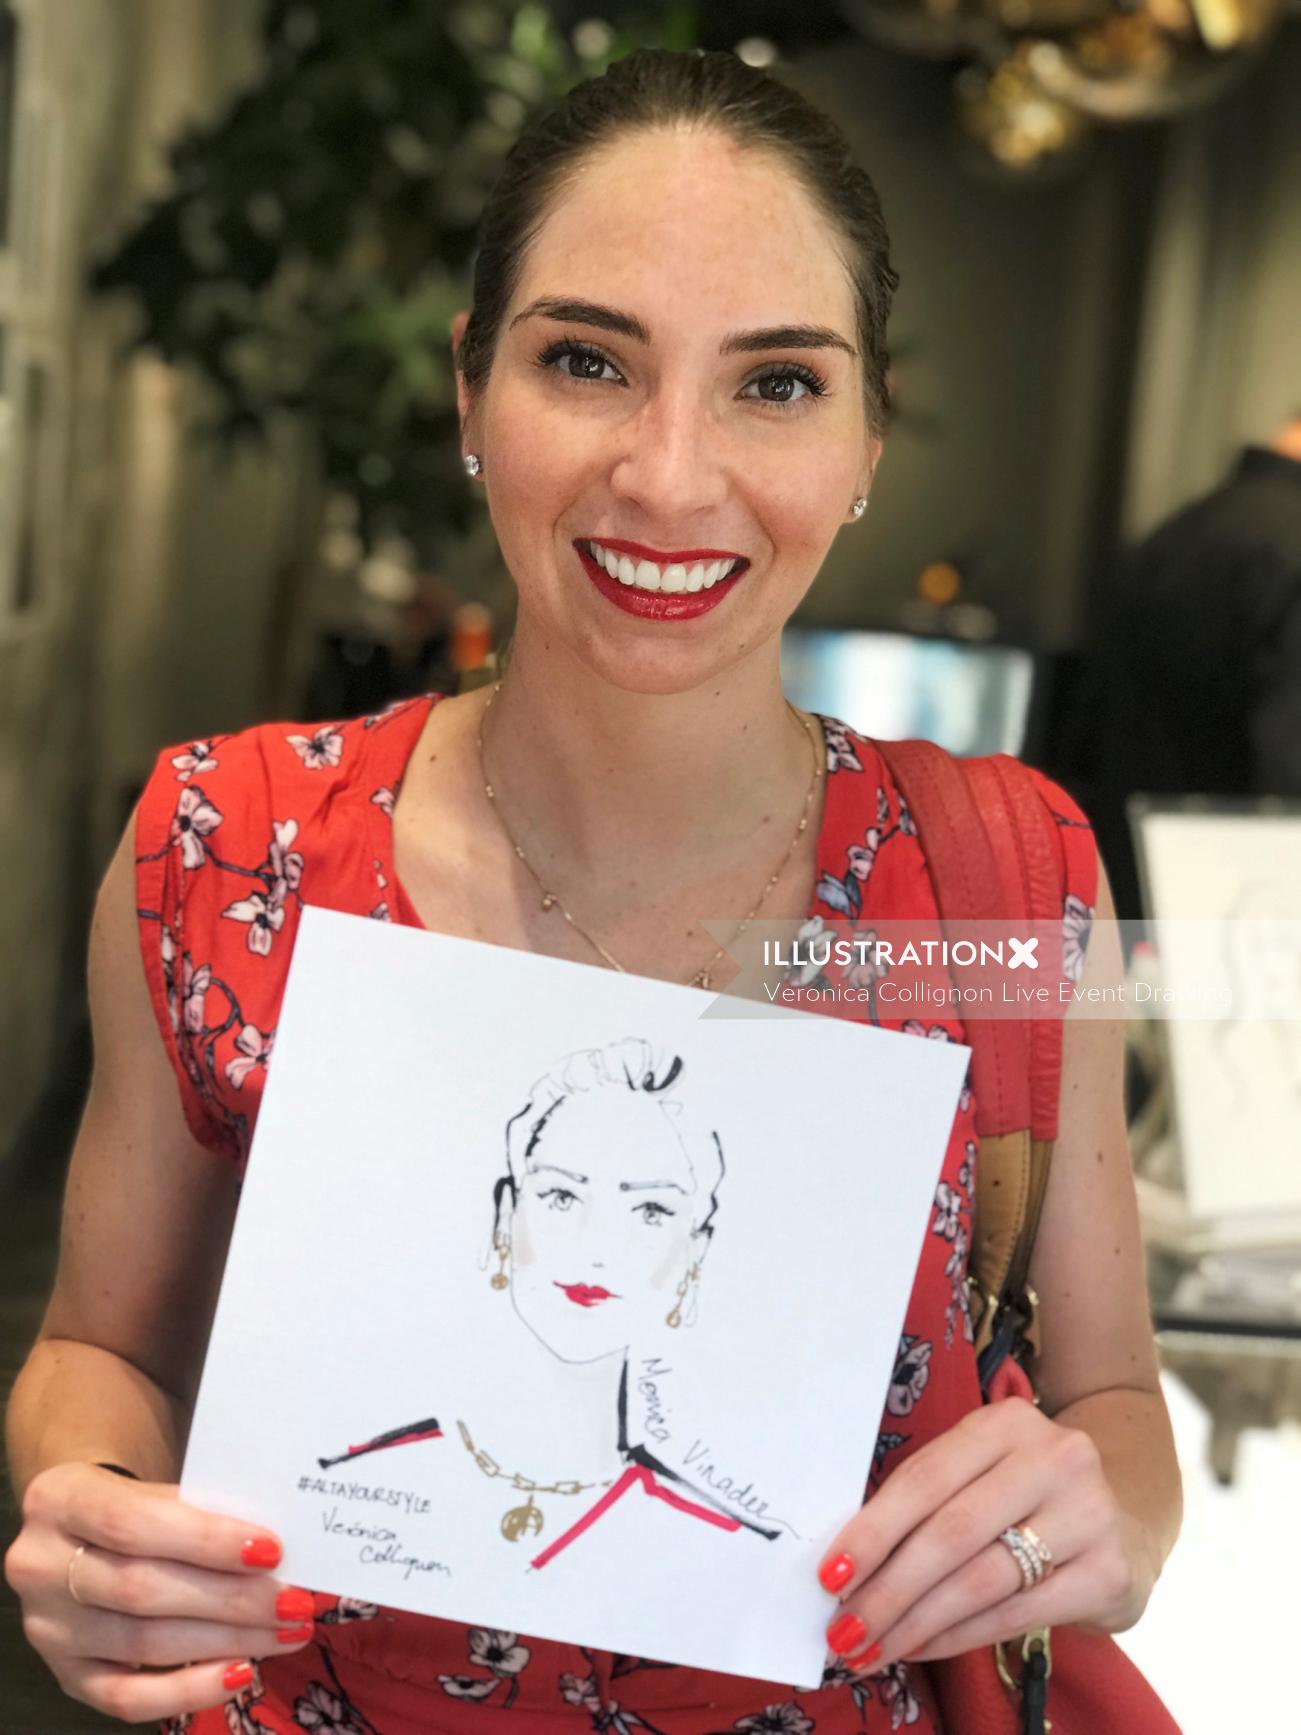 Live Event drawing smiley woman with sketch
